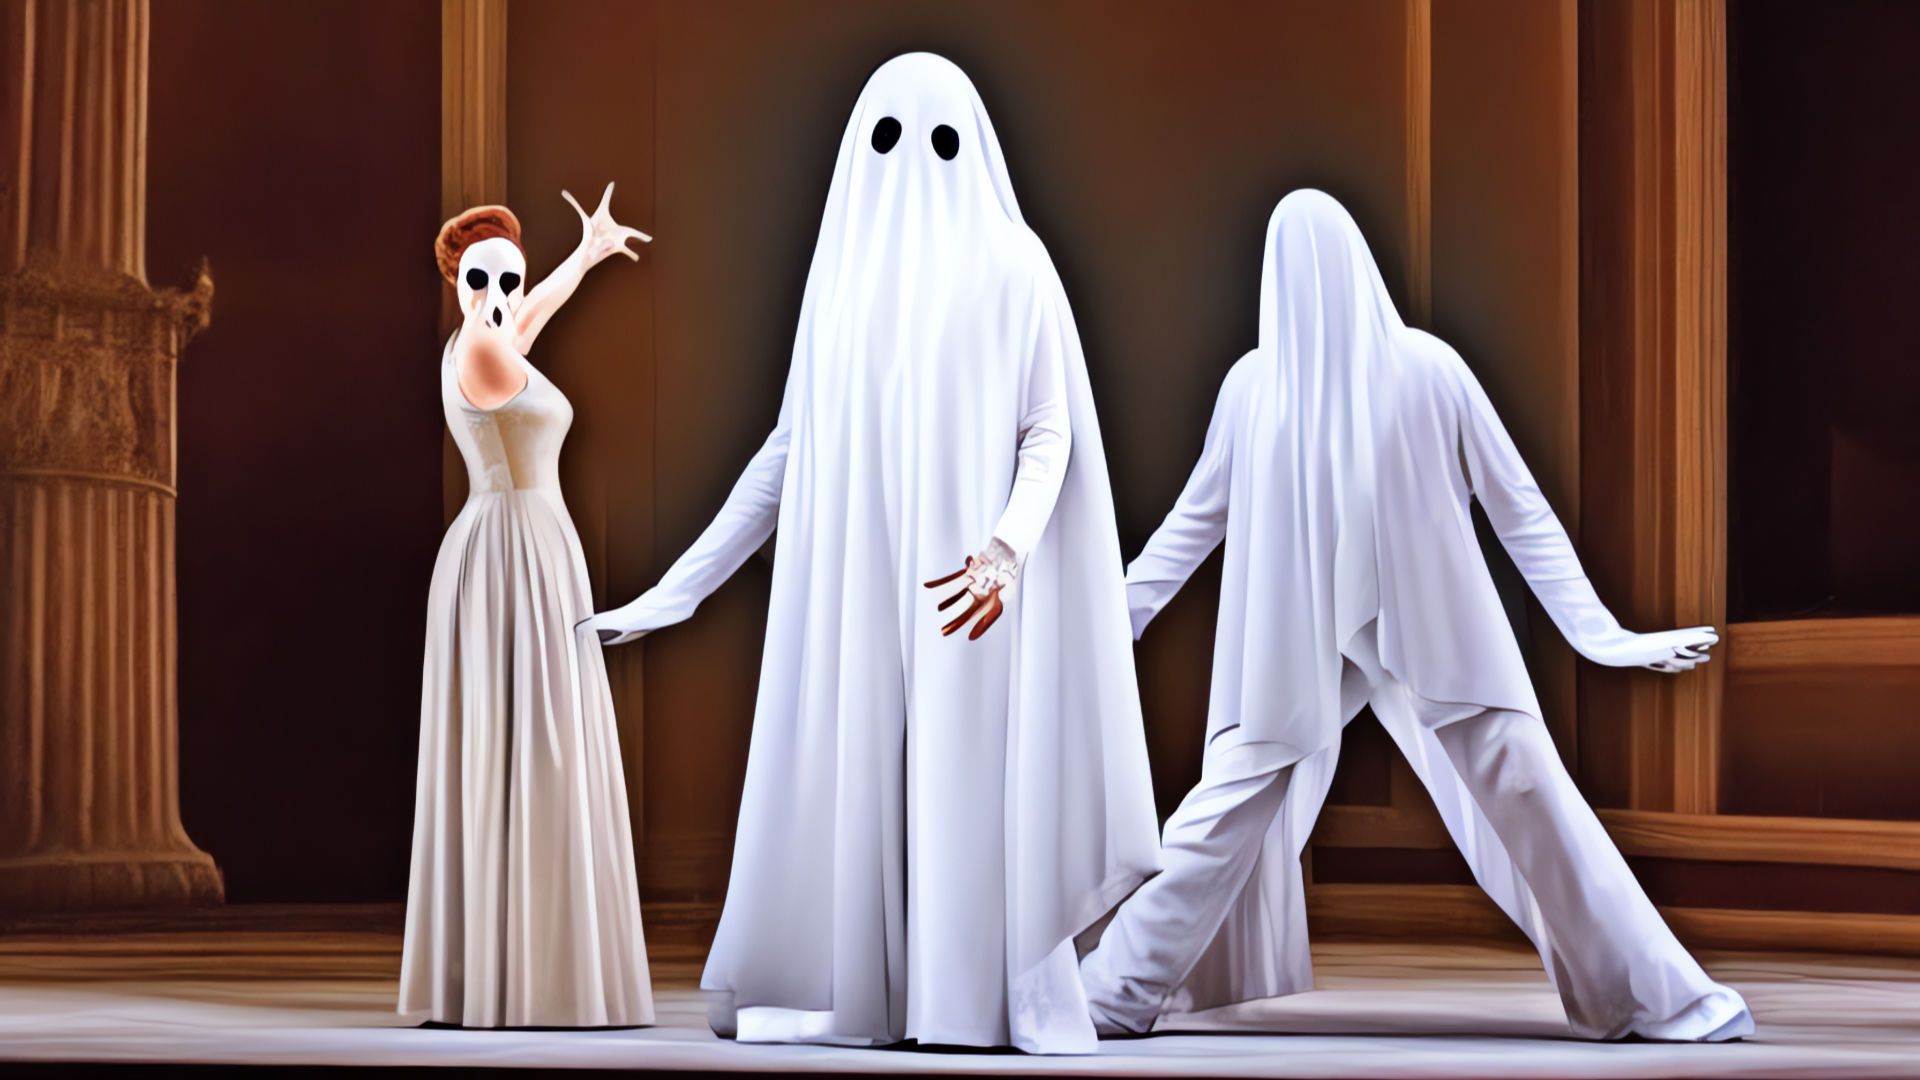 Artificial intelligence-generated image of three ghost-like figures performing on stage at an opera house.